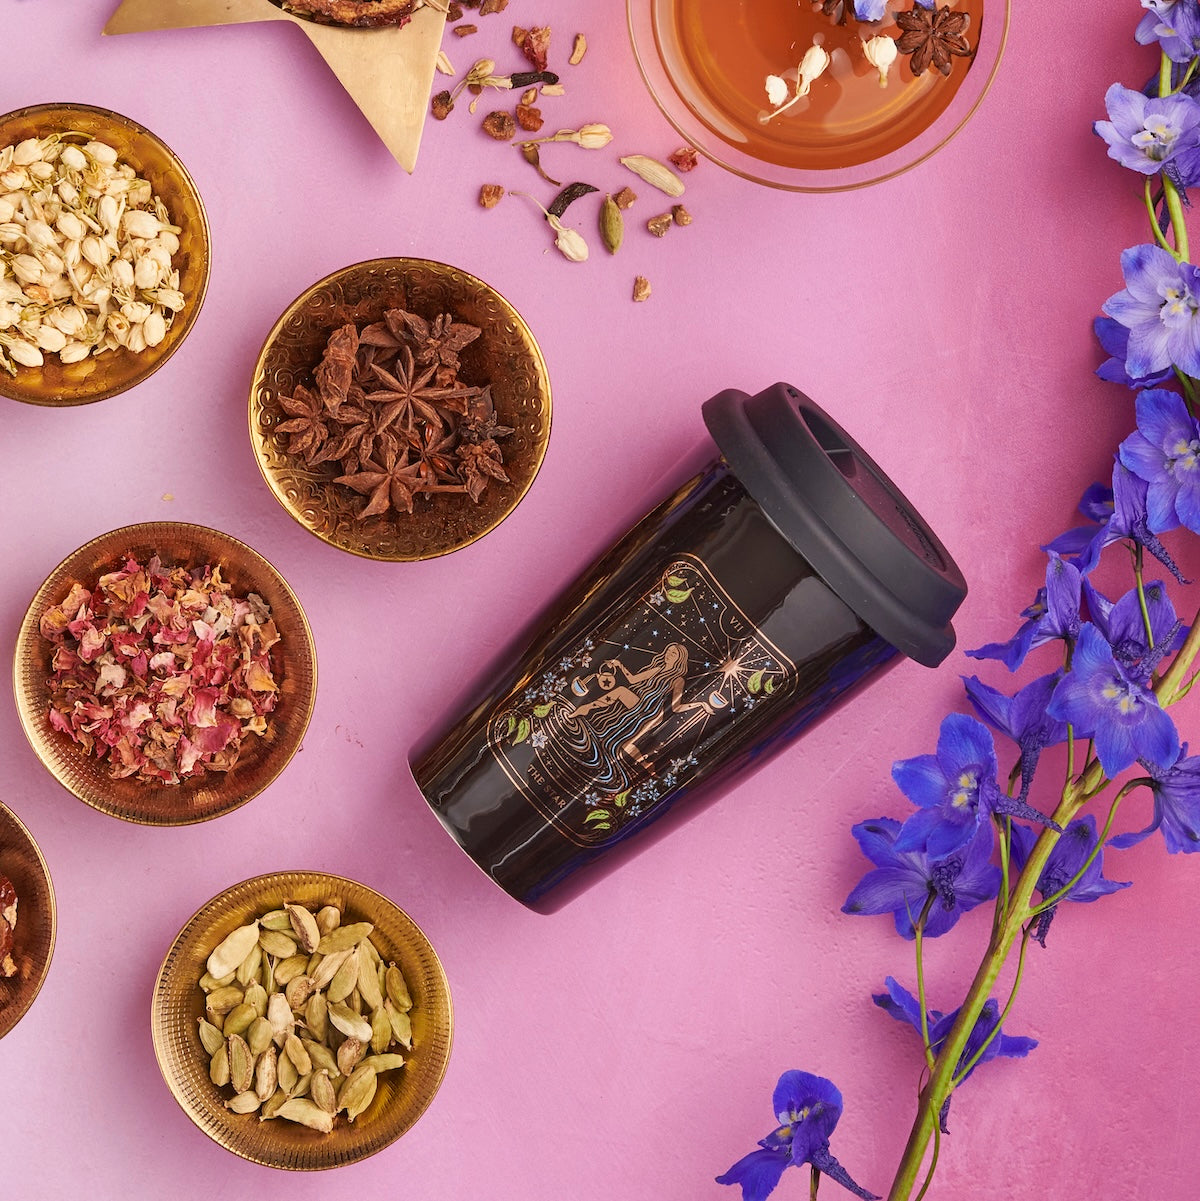 A travel mug with a celestial design is on a pink surface surrounded by bowls containing various dried spices, including star anise, cardamom, and rose petals. Nearby, there's a cup of organic tea and a few pastries, while vibrant blue flowers also adorn the scene.